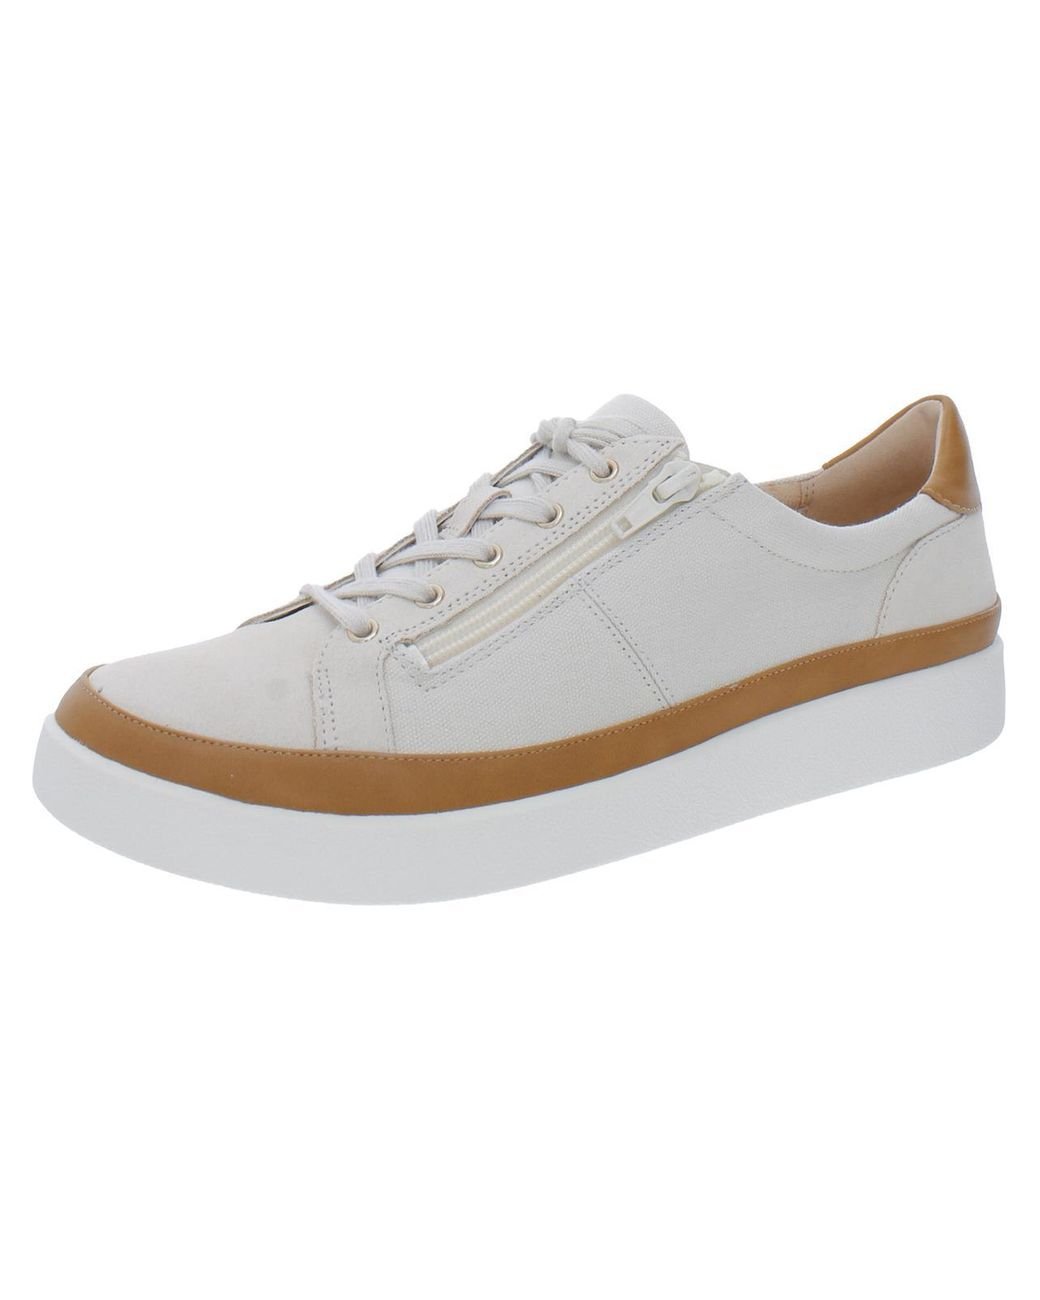 Vionic Mayra Zipper Suede Casual And Fashion Sneakers in White | Lyst